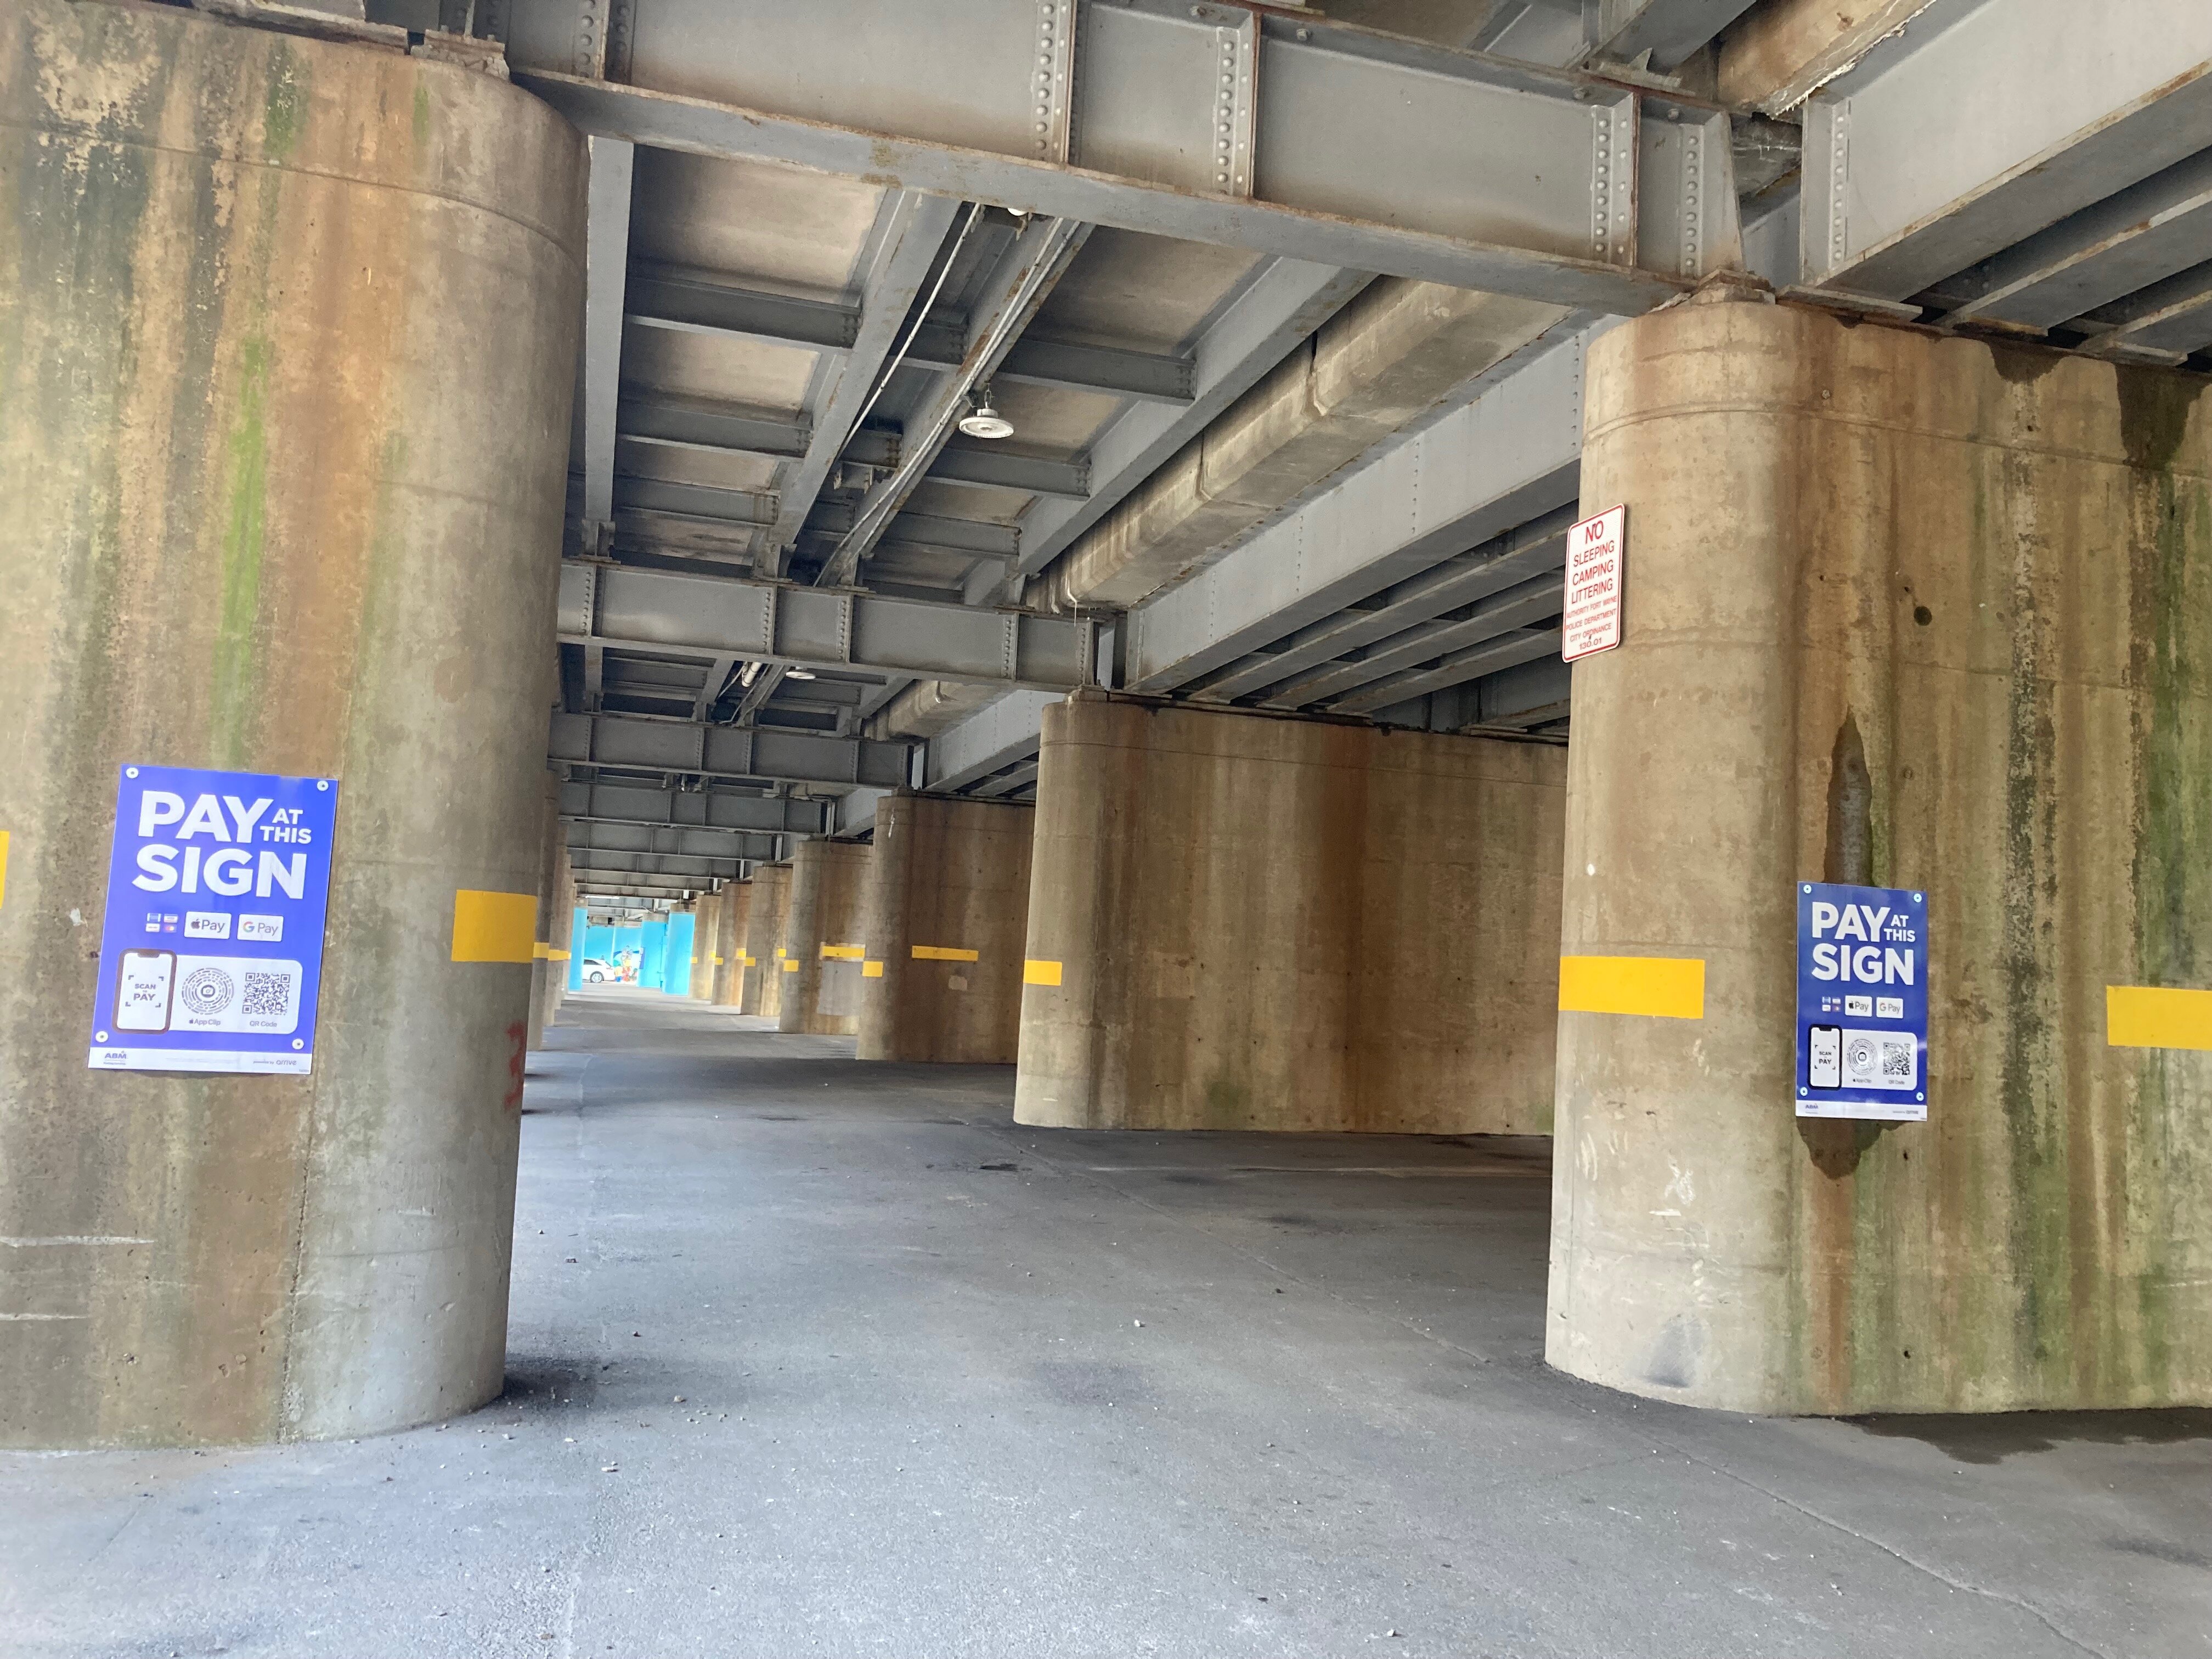 Fort Wayne has creatively kept up with the demand for parking by repurposing under-utilized spaces, like railroad underpasses.   